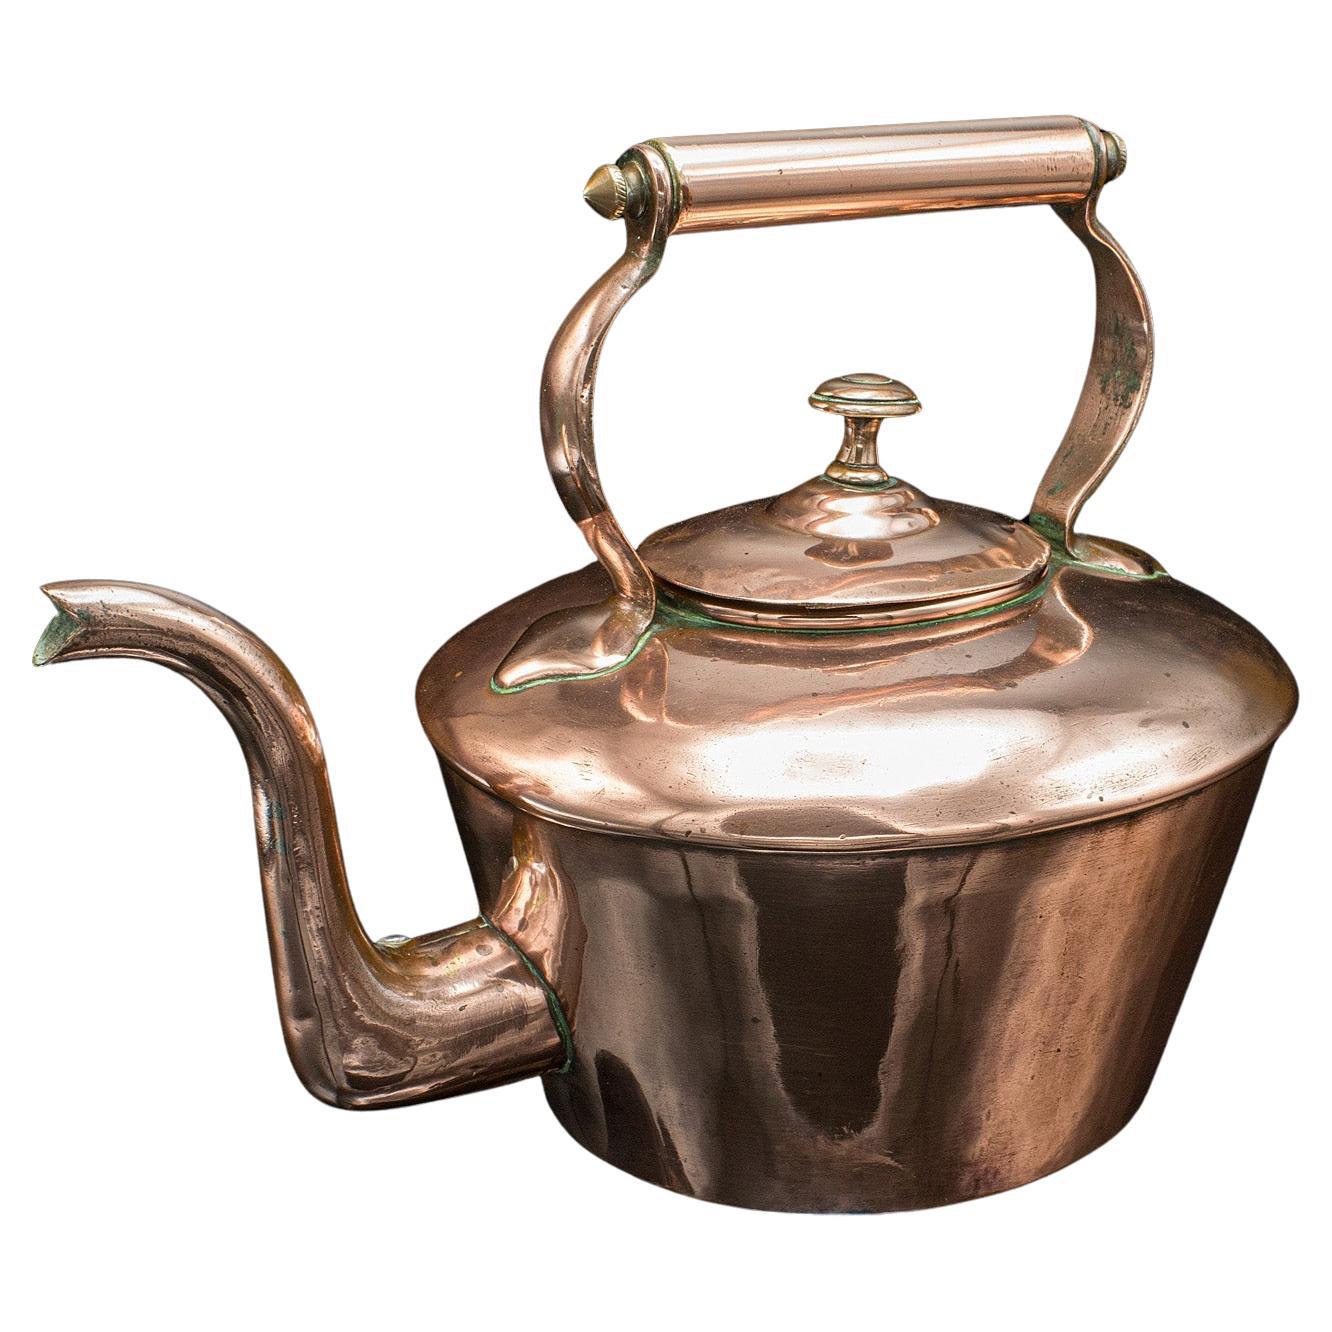 Antique Scullery Kettle, English, Copper, Stovetop Teapot, Victorian, Circa 1870 For Sale